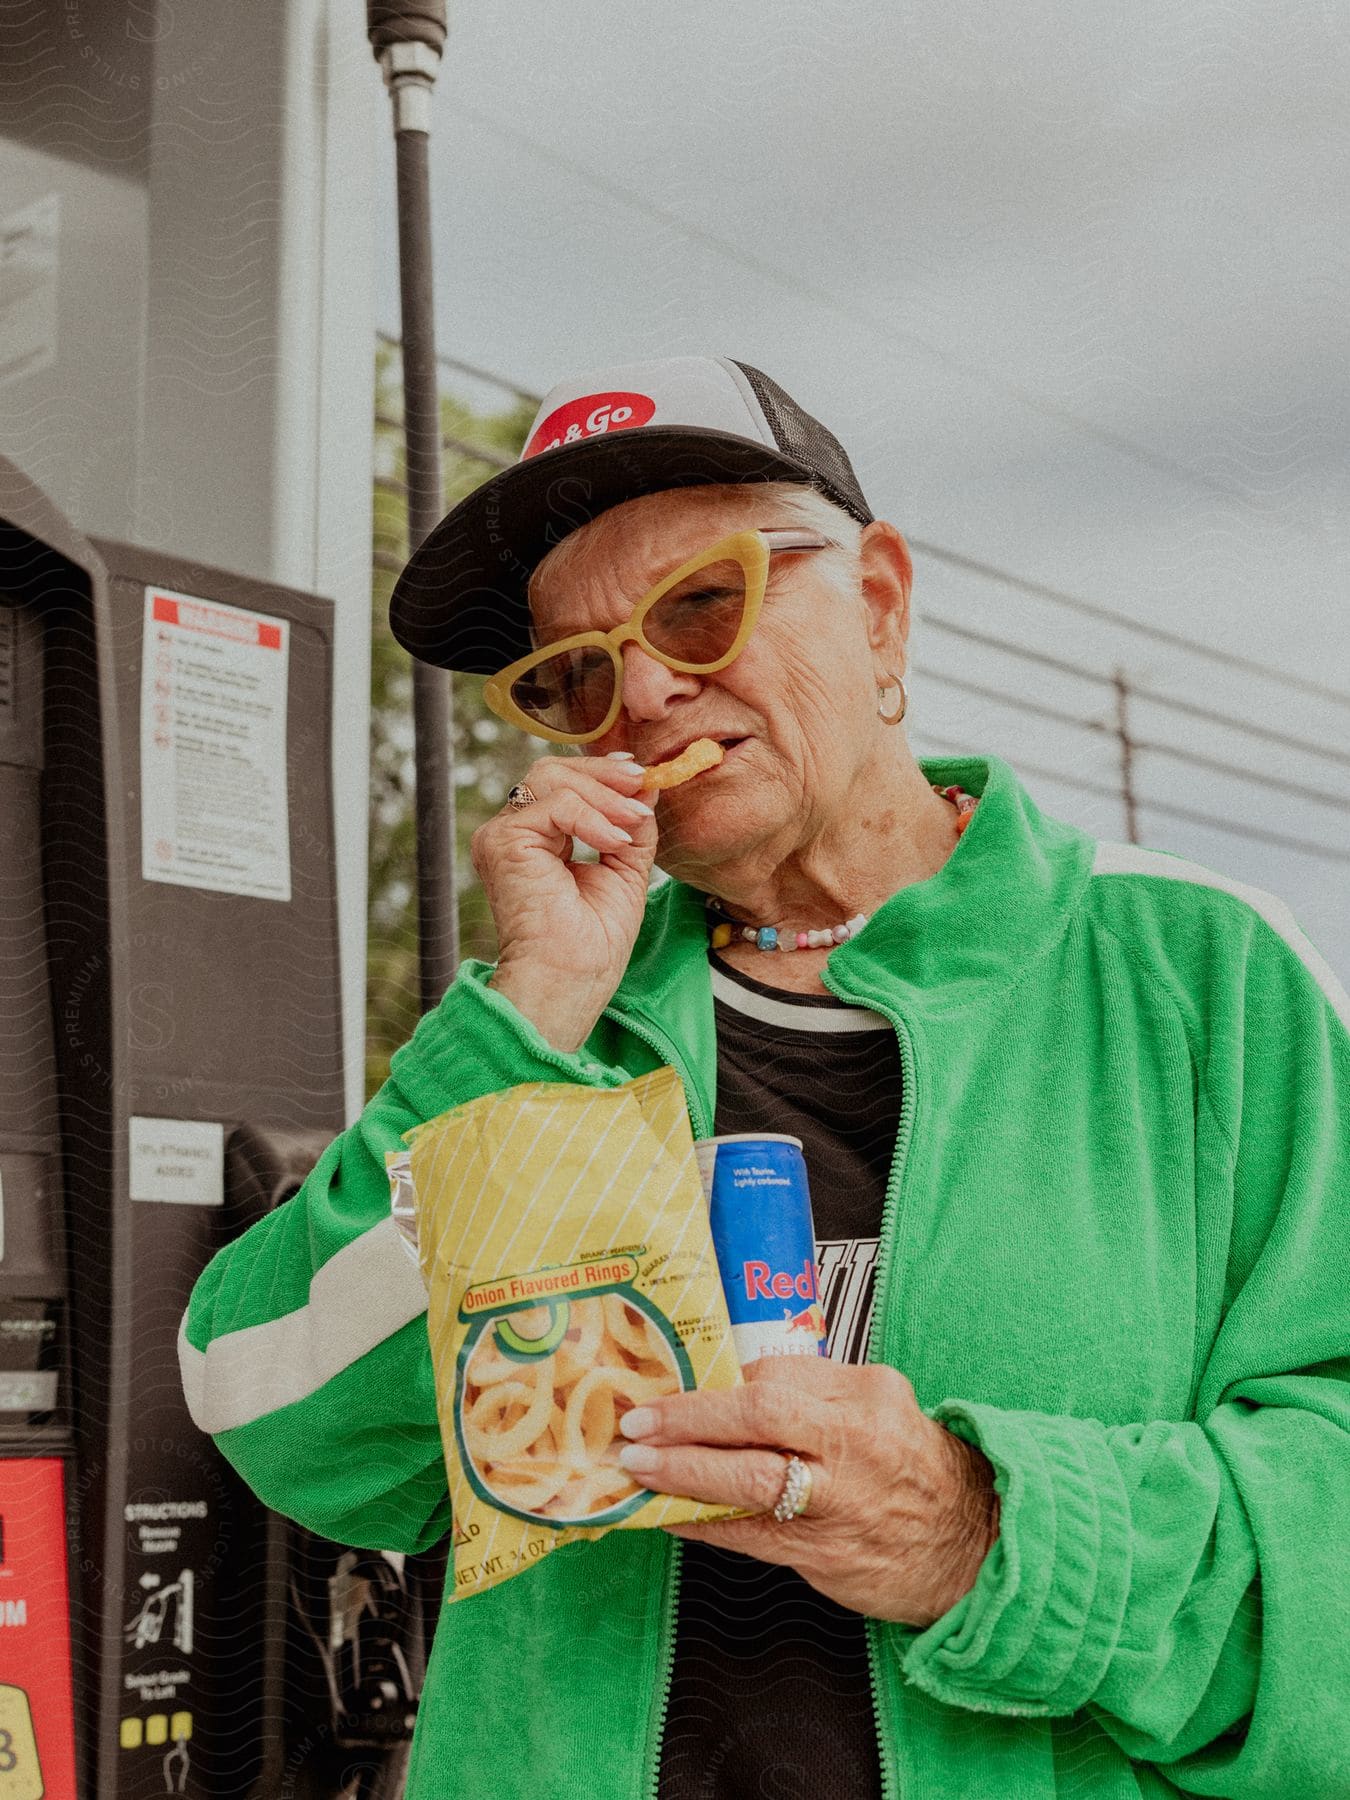 An old woman eating some snacks at a gas station